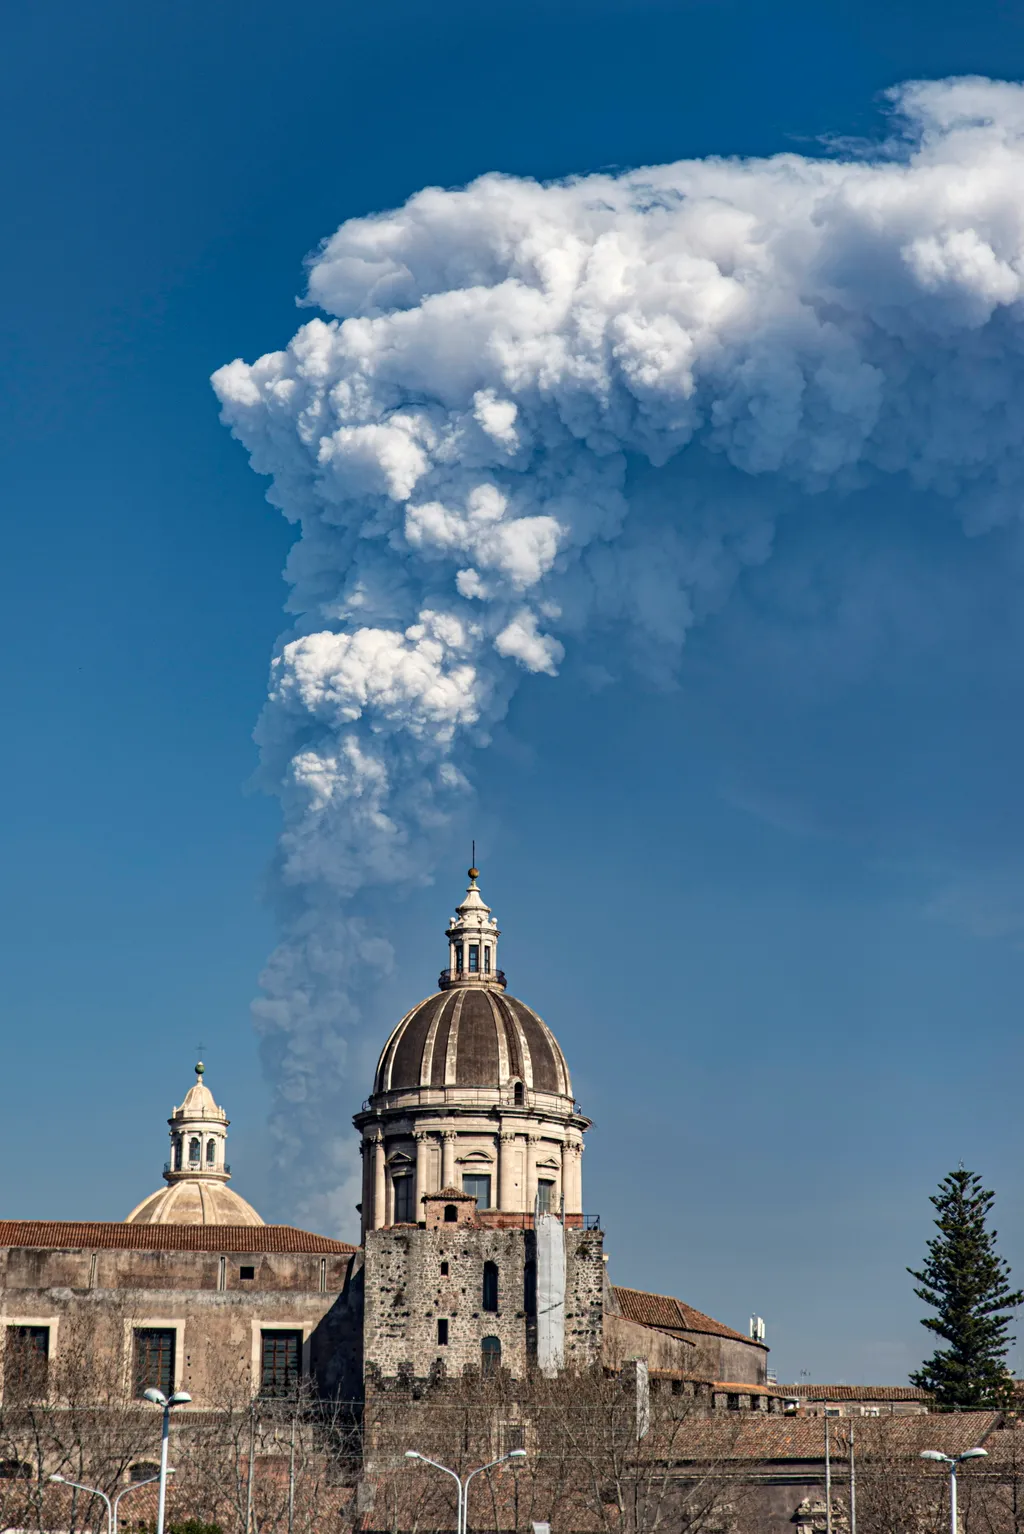 Catania, March 4, 2021. Ninth eruption in 17 days from the Southeast Crater. Ash plume seen from Catania. 